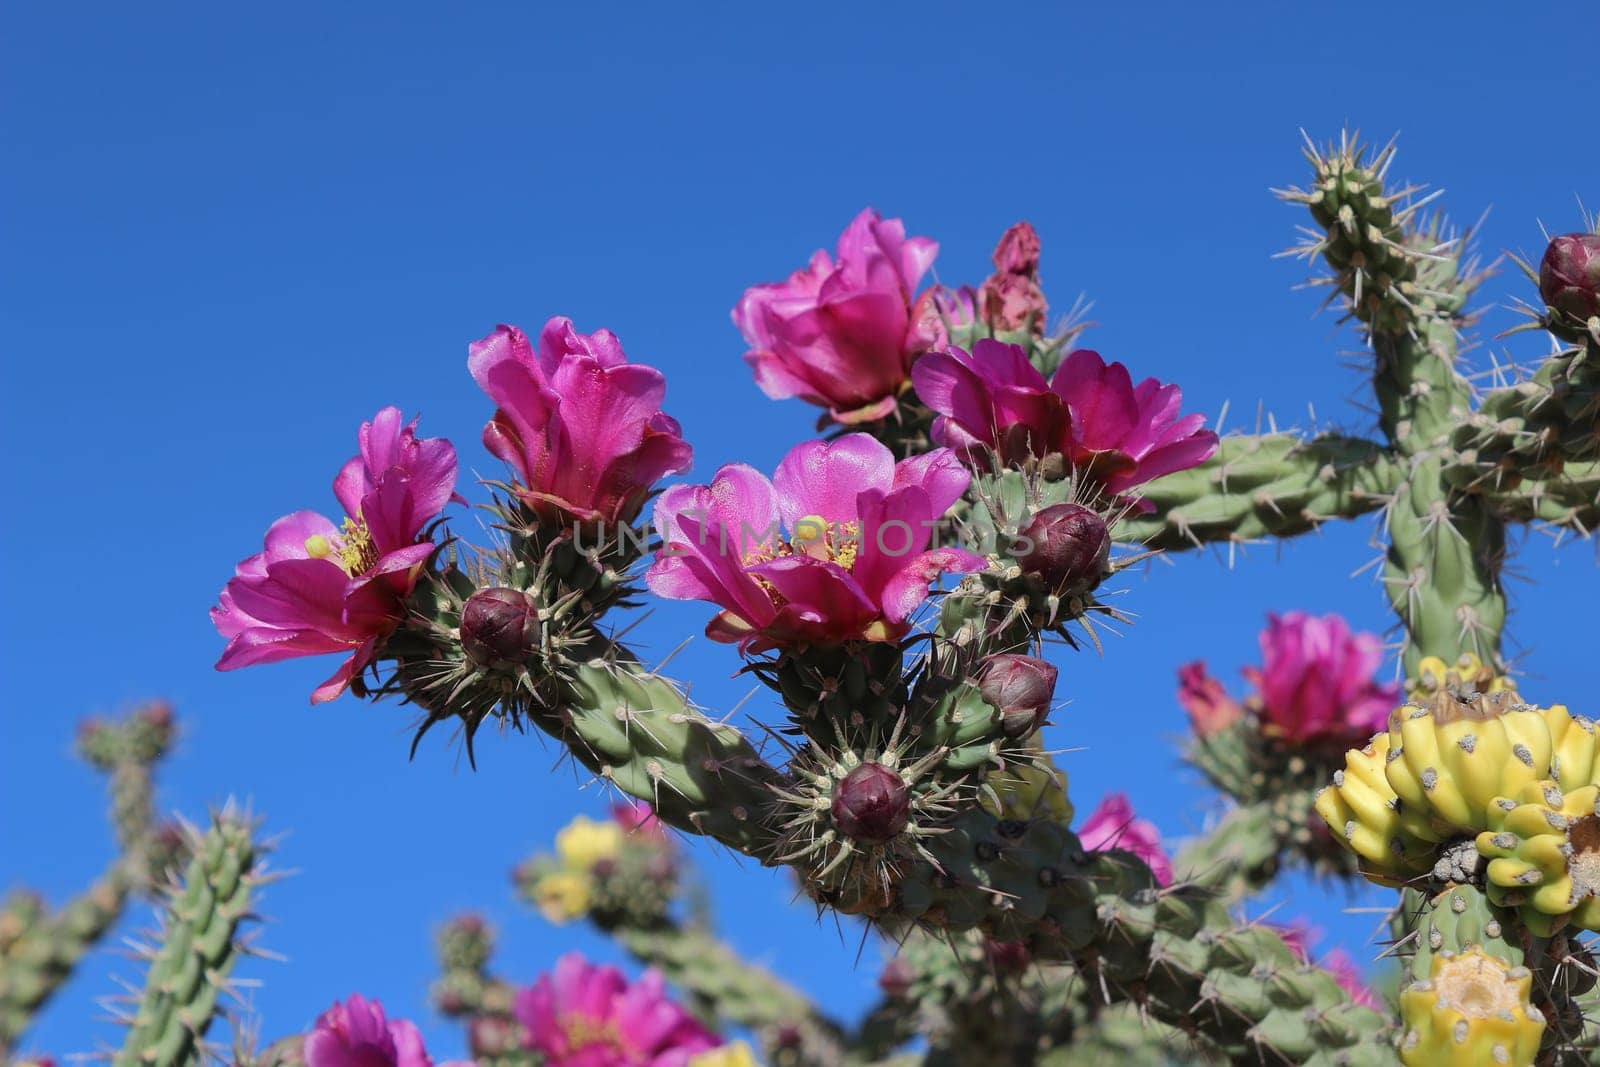 Winter Hardy shrub cactus Cylindropuntia Spinsior Beautiful DARK PURPLE BLOSSOMS flowering Texas, USA. by Marcielito